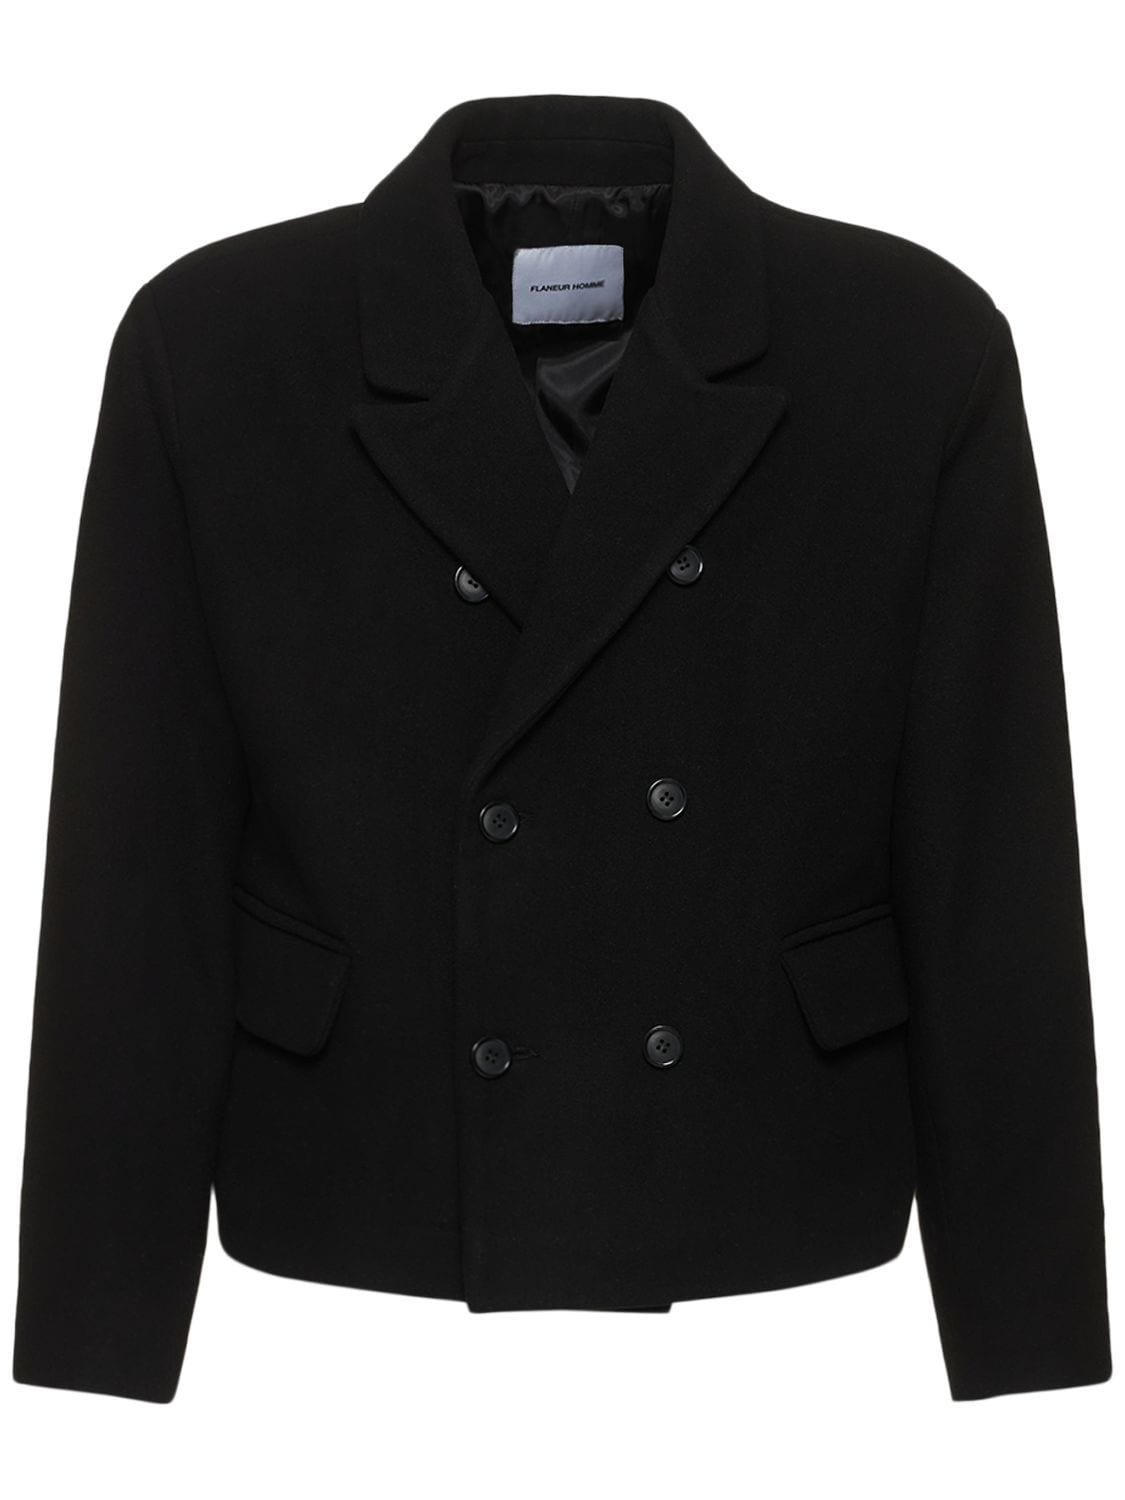 FLANEUR HOMME Double Breasted Cropped Wool Blazer